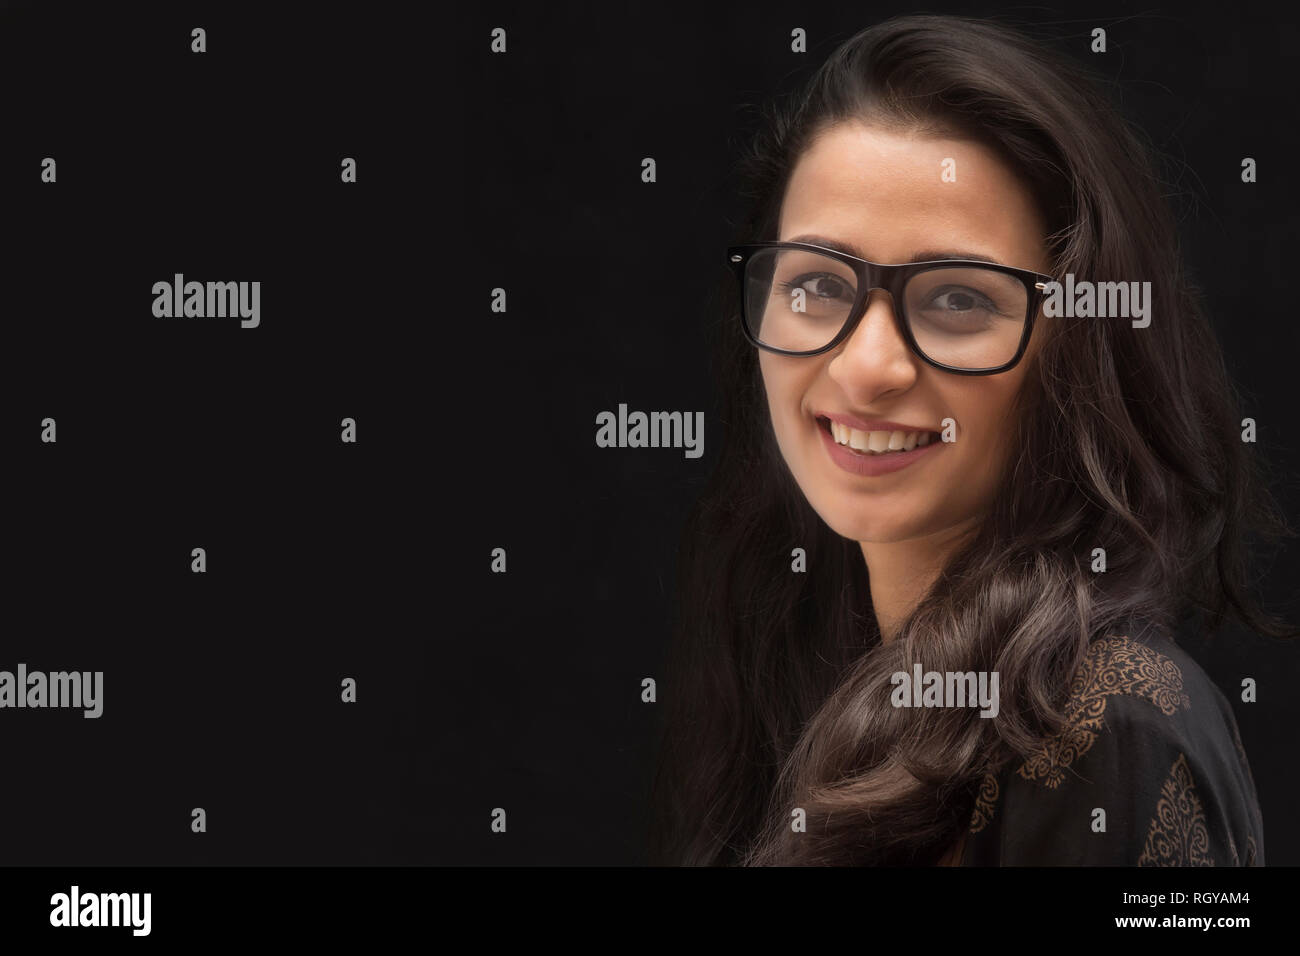 Portrait of a beautiful young woman smiling looking at camera wearing eyeglasses over black background Stock Photo